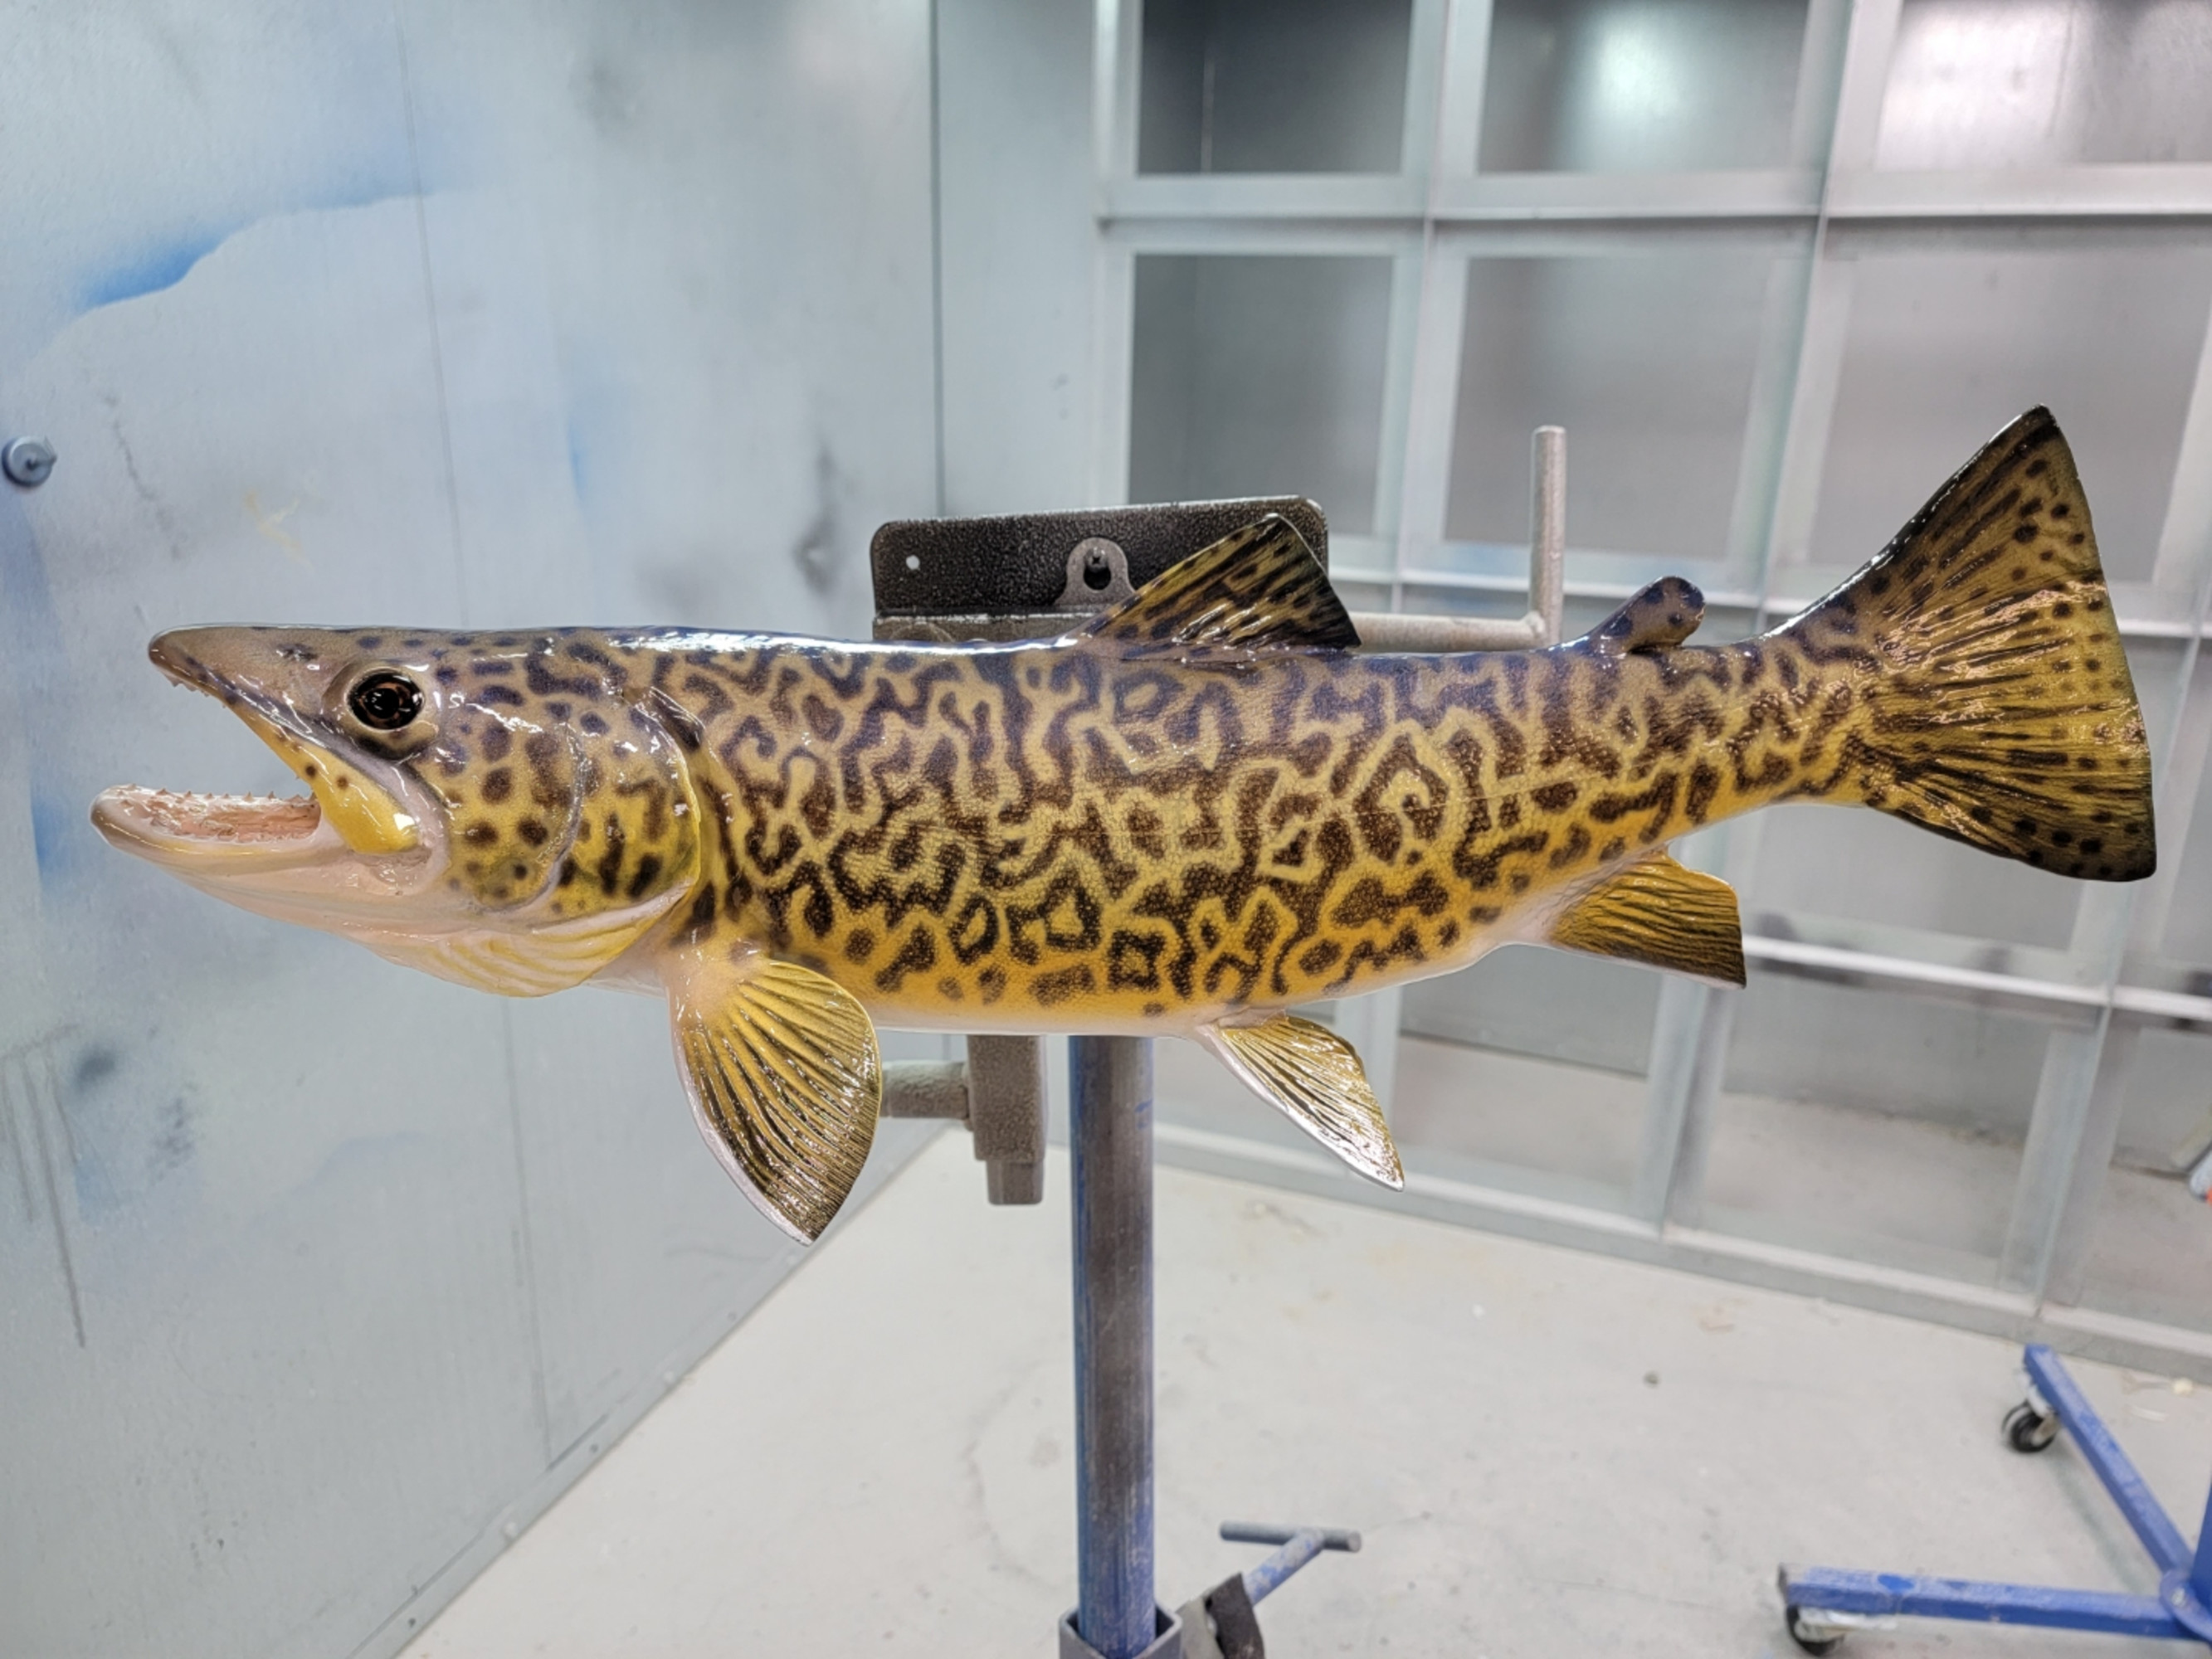 Tiger Trout Fish Mounts & Replicas by Coast-to-Coast Fish Mounts